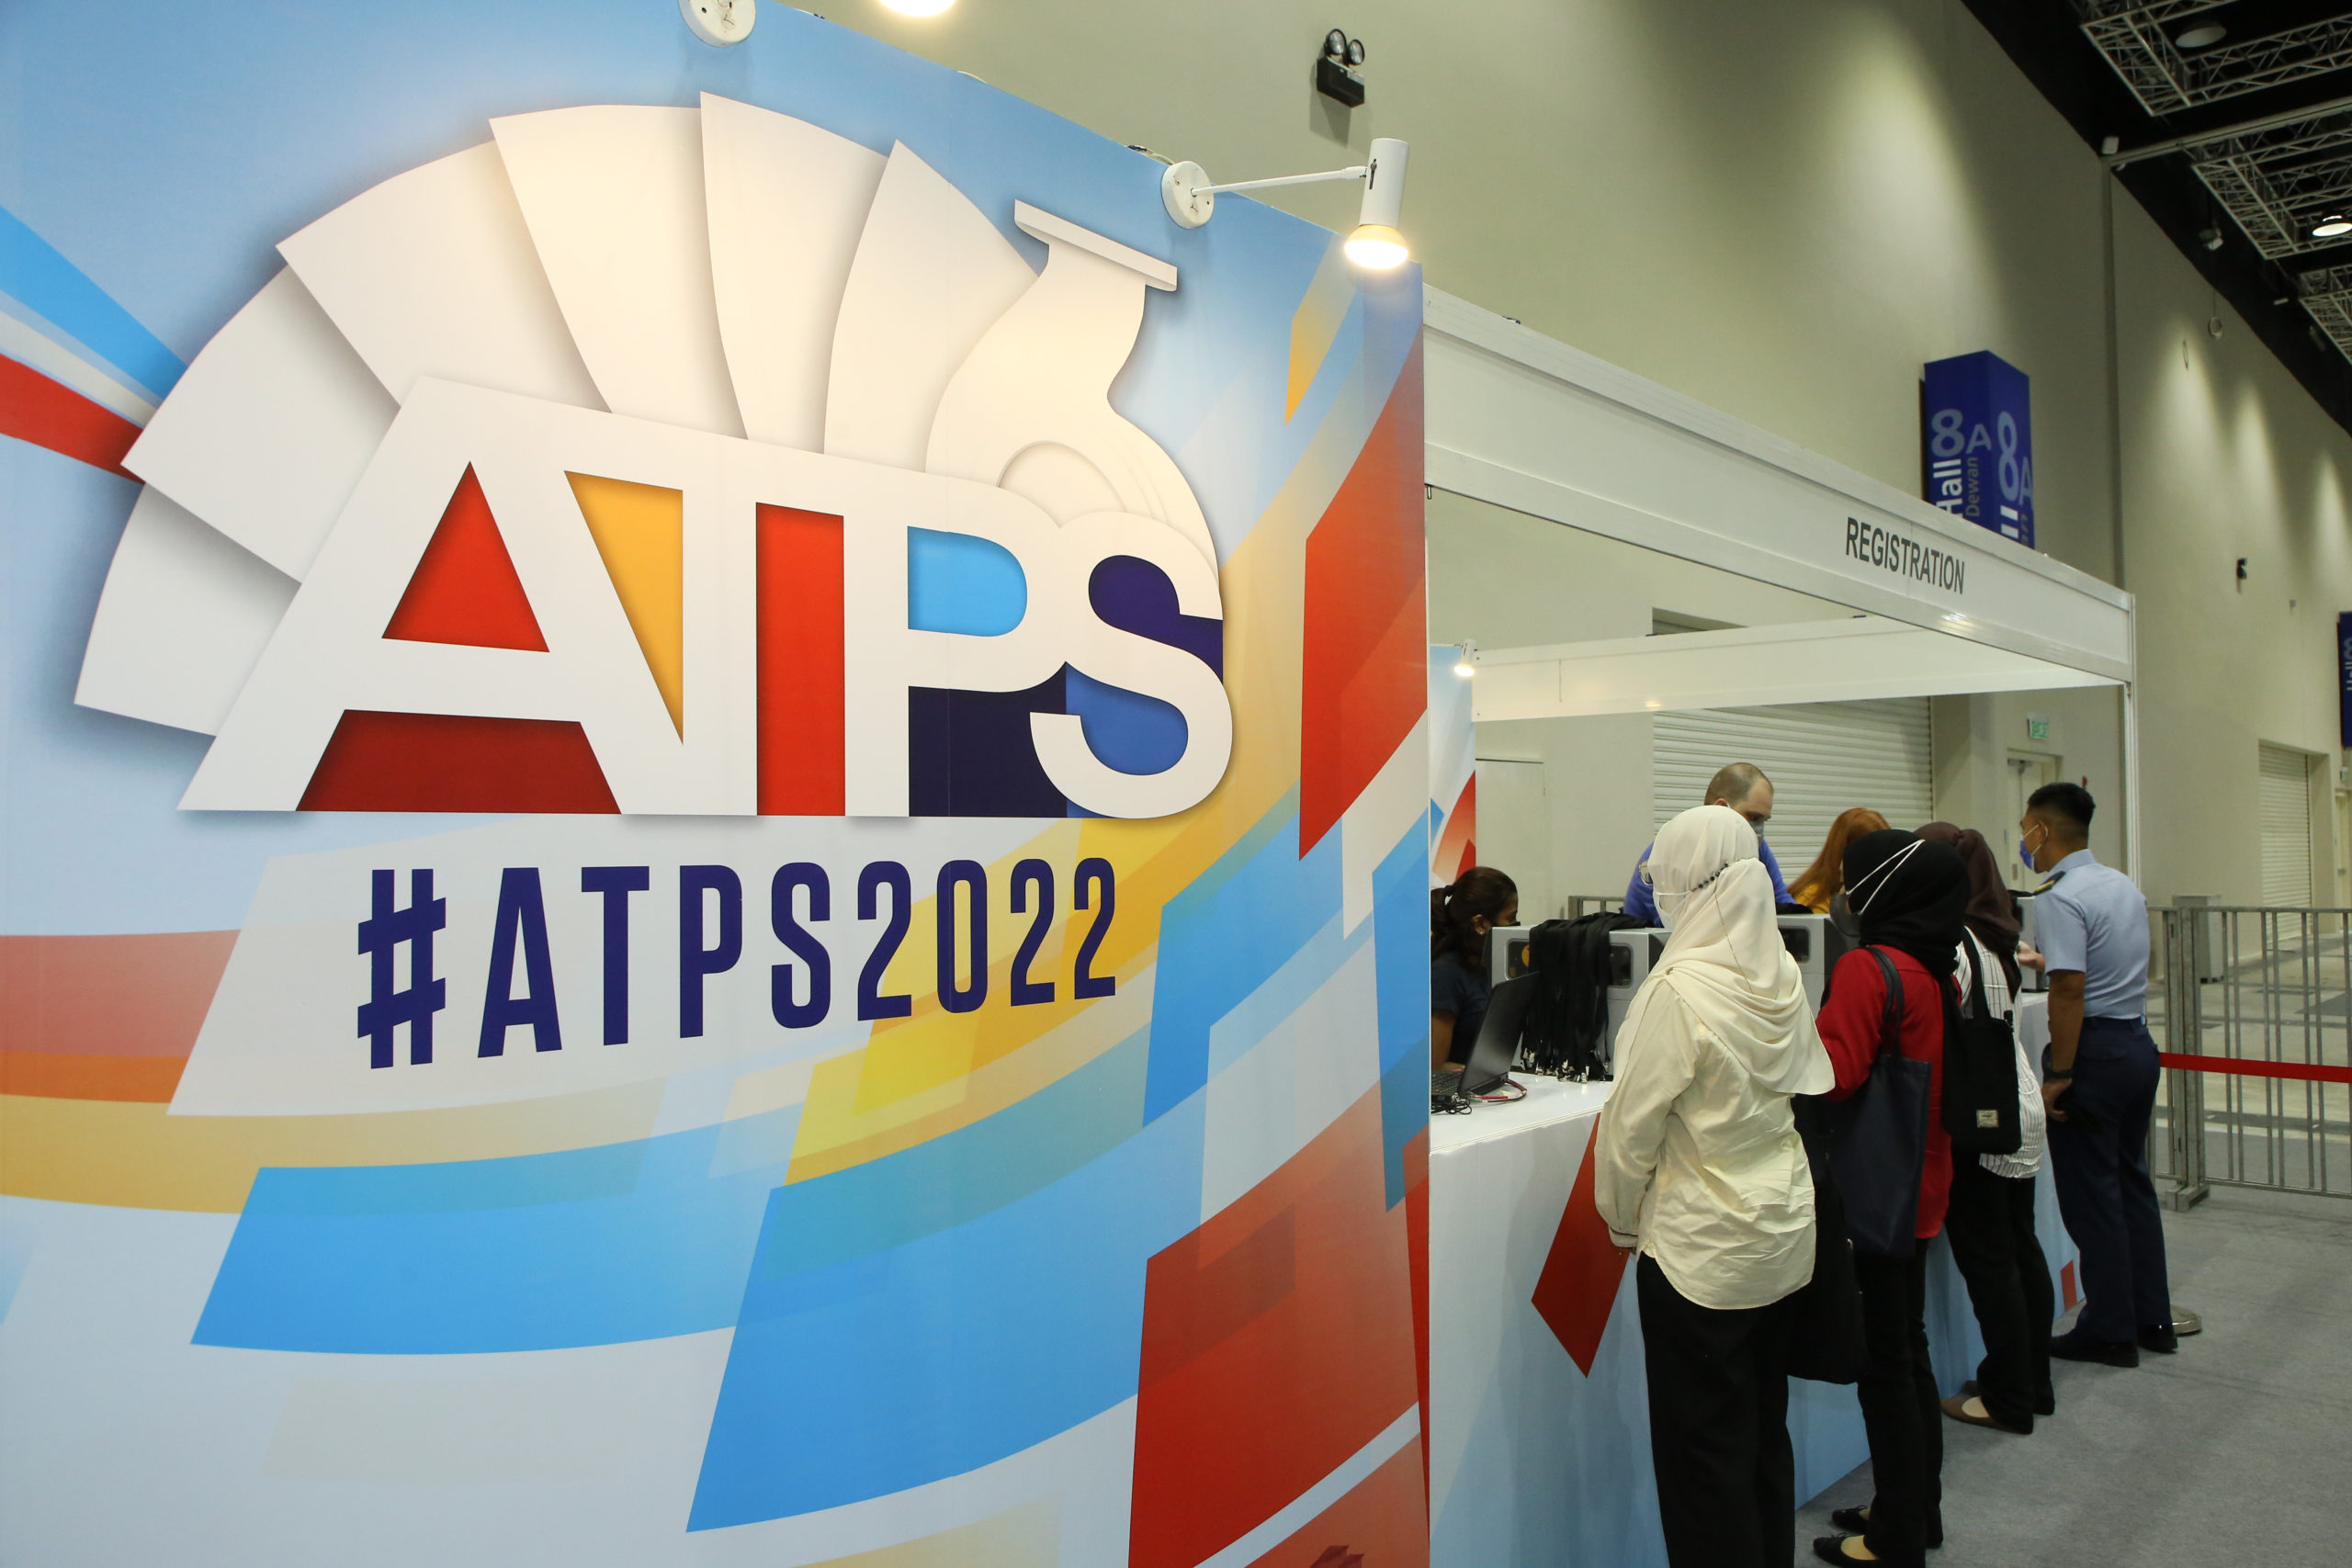 View of ATPS 2022 Registration Counter